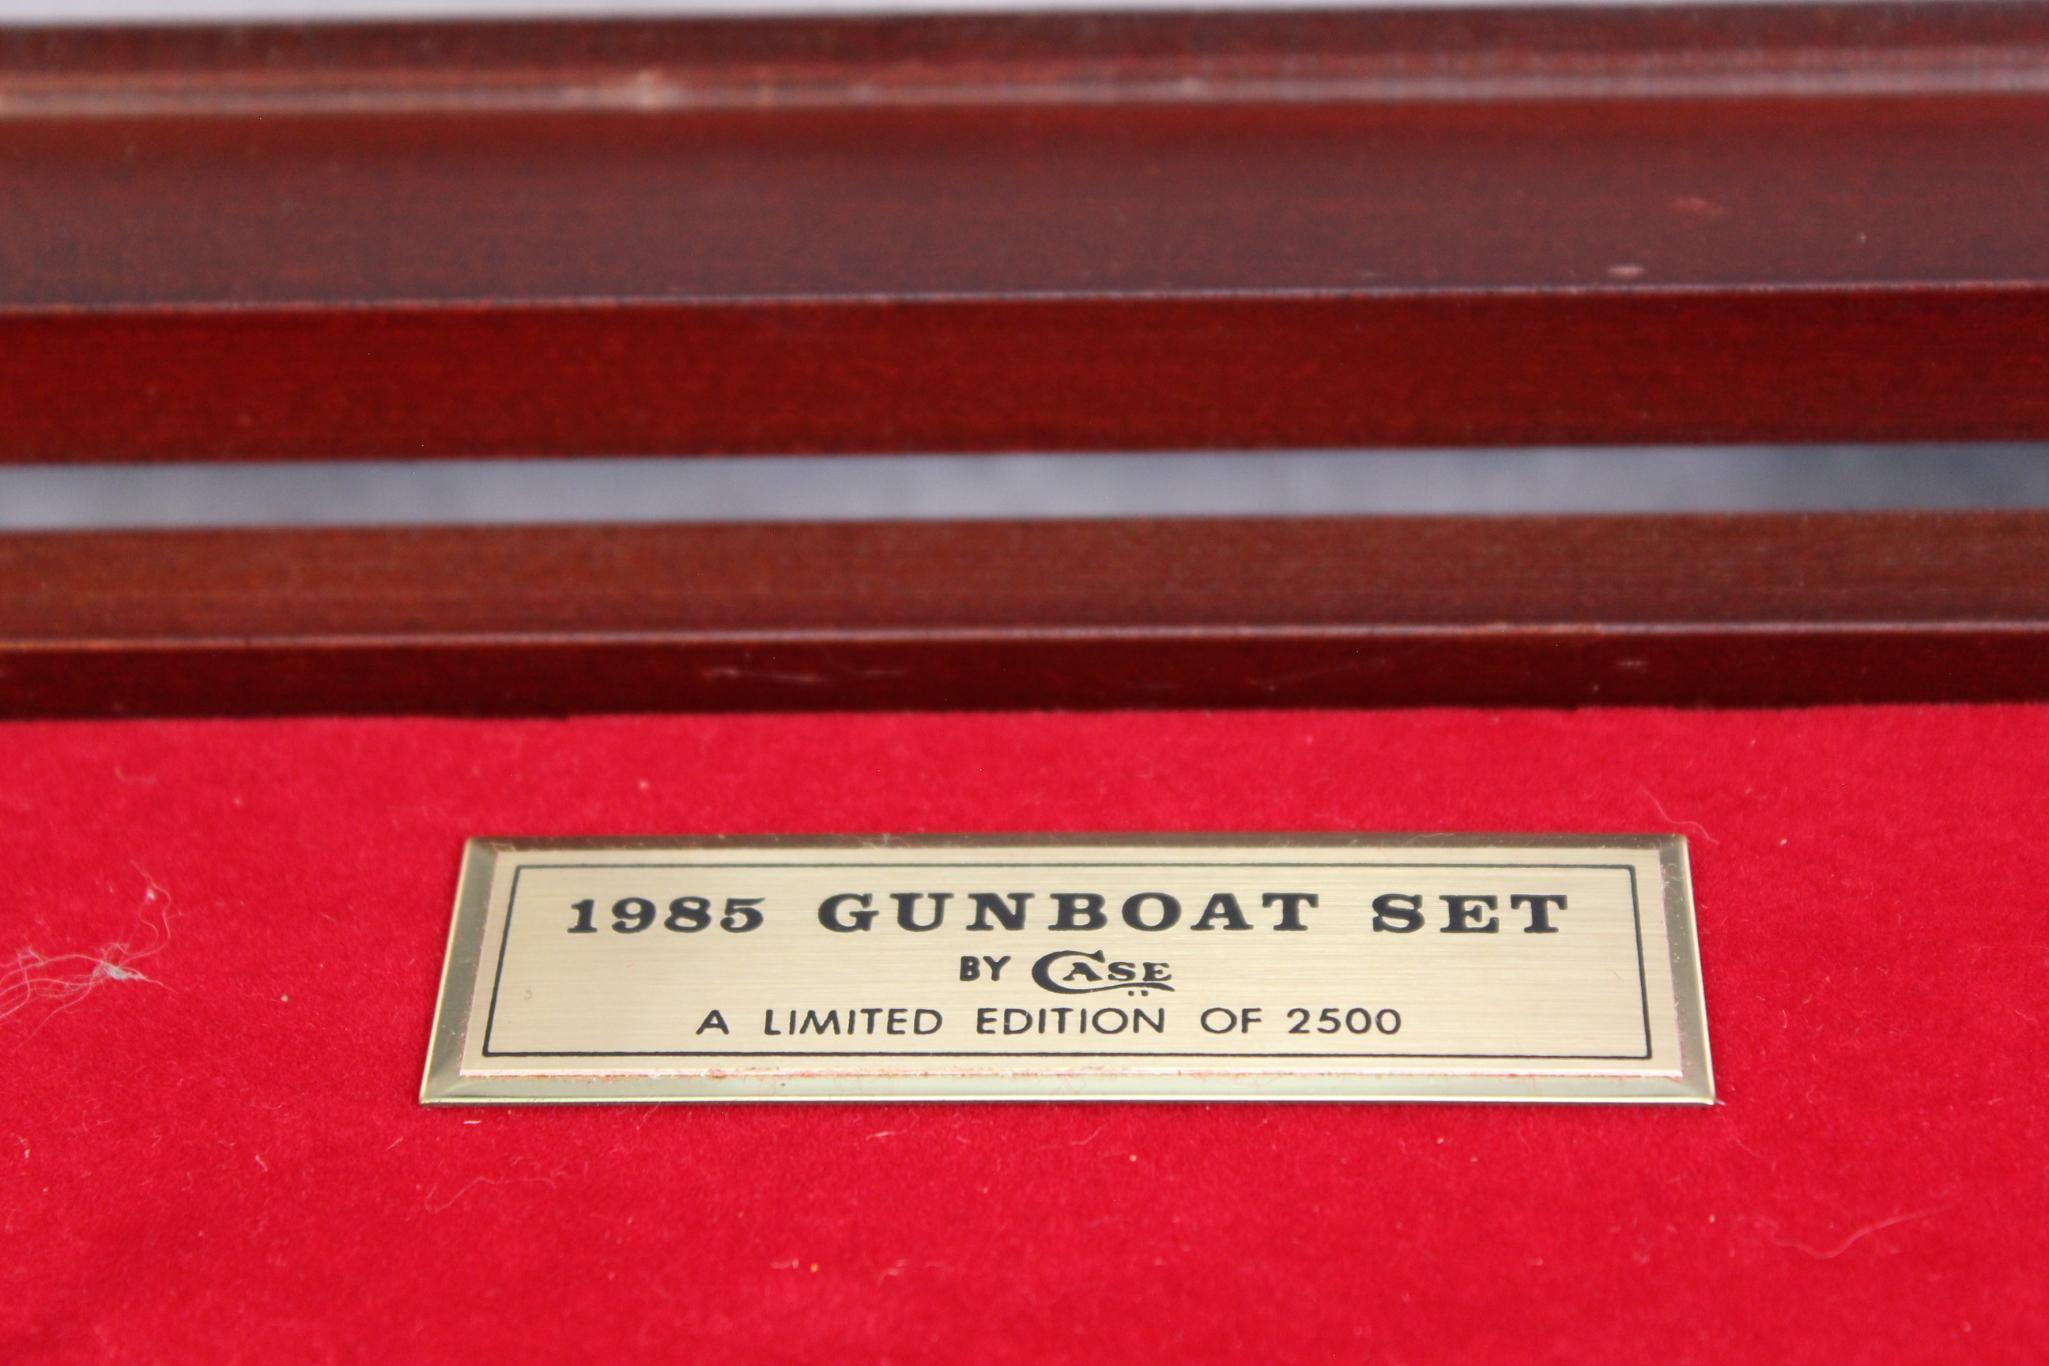 CASE XX 1985 GUNBOAT SET WITH DISPLAY CASE